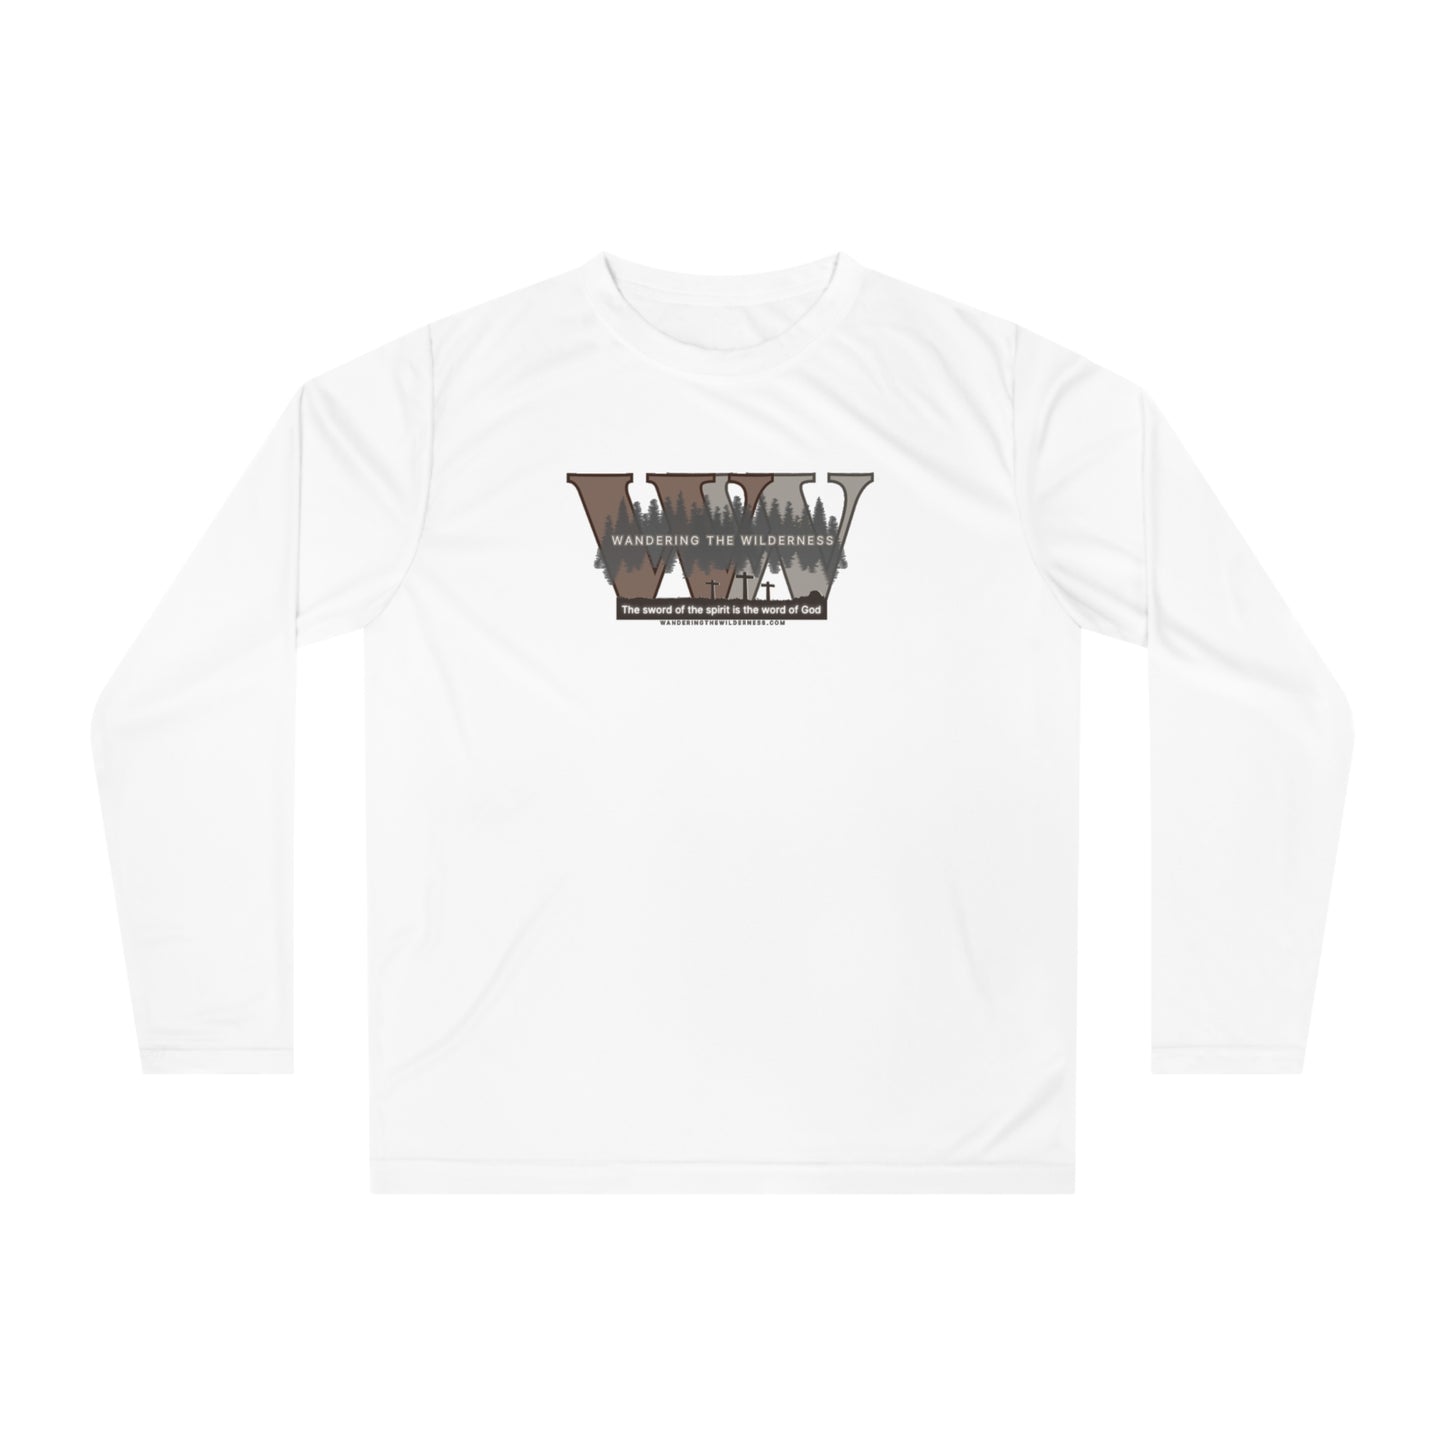 Wandering the Wilderness Performance Long Sleeve Shirt big logo on front.